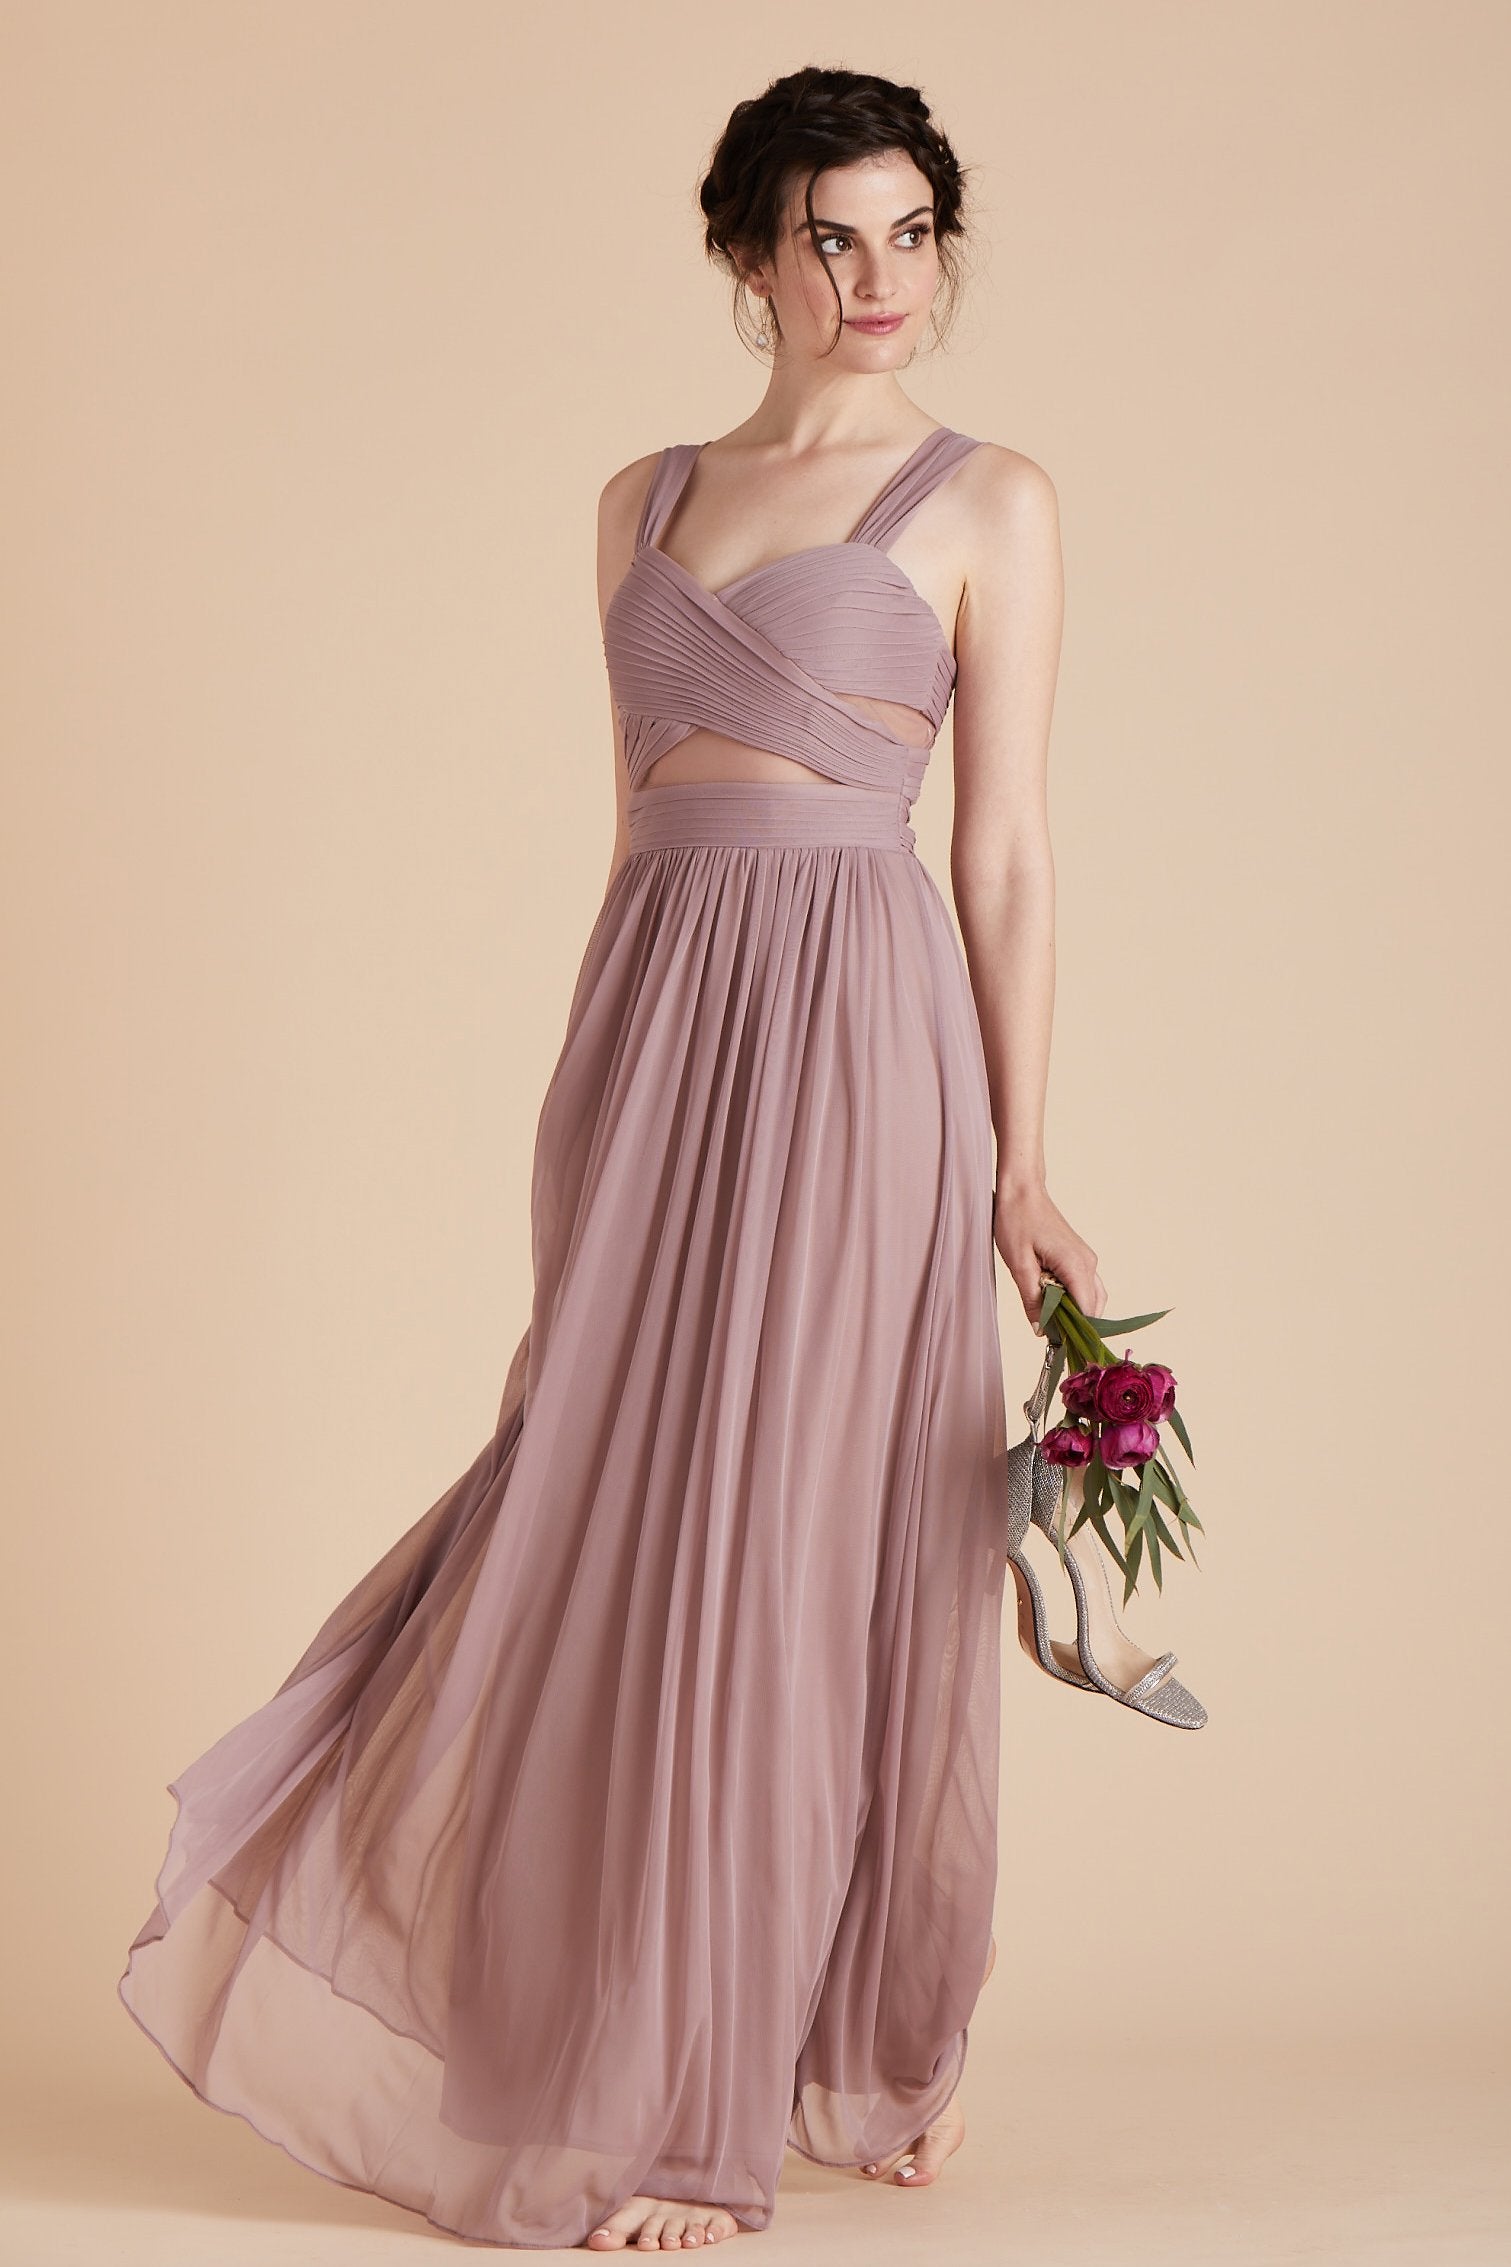 Elsye bridesmaid dress in mauve pink chiffon by Birdy Grey, front view